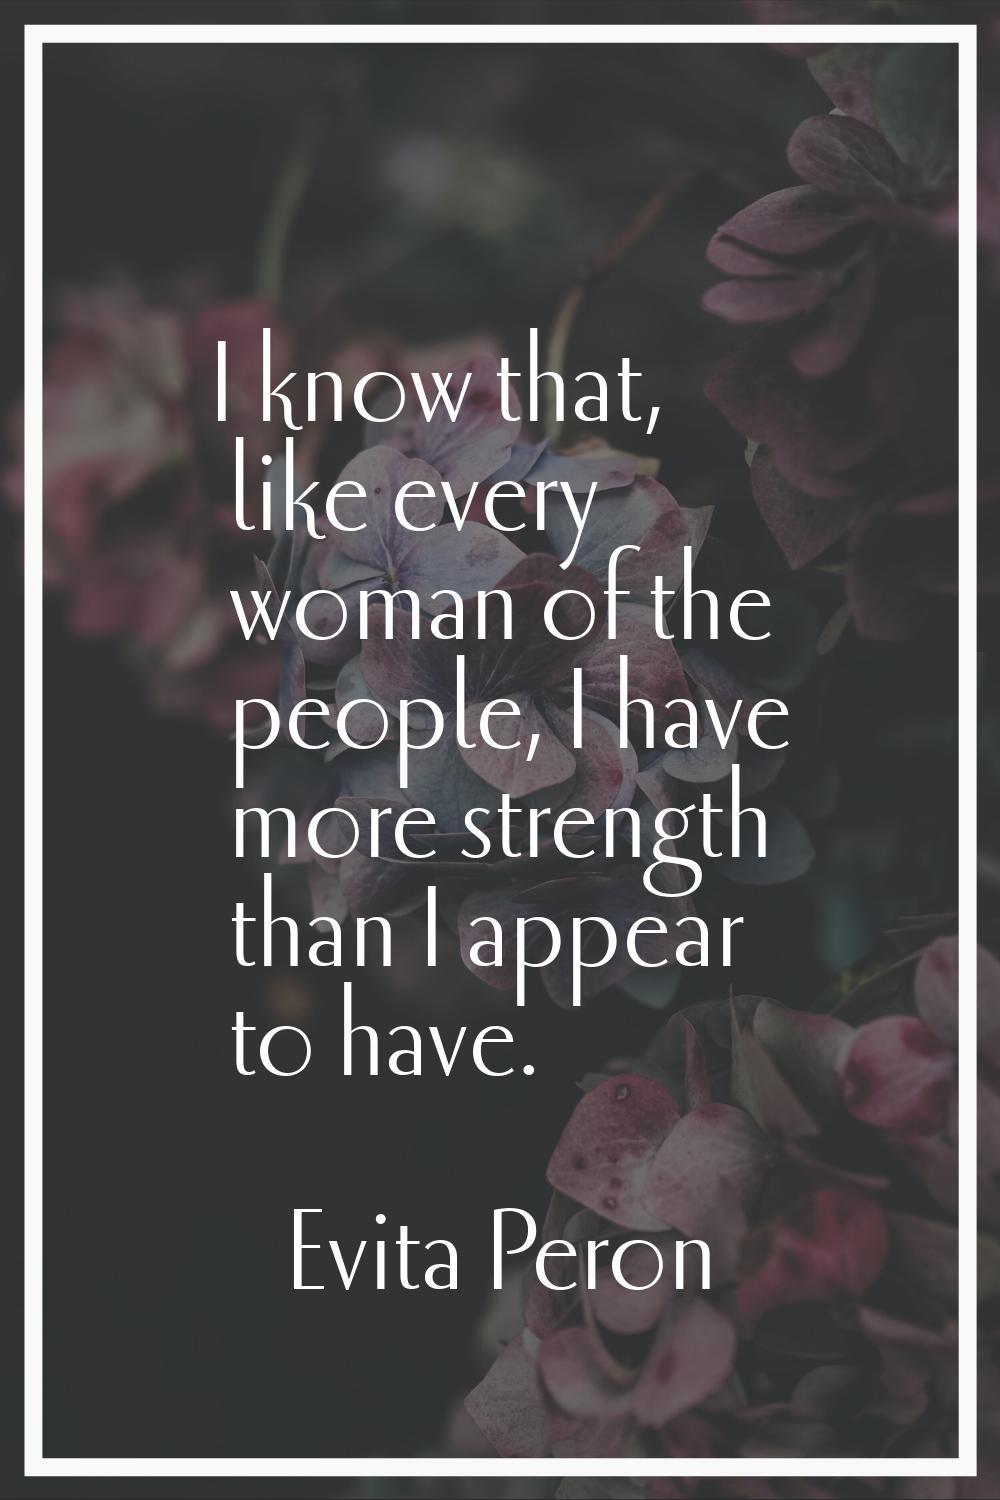 I know that, like every woman of the people, I have more strength than I appear to have.